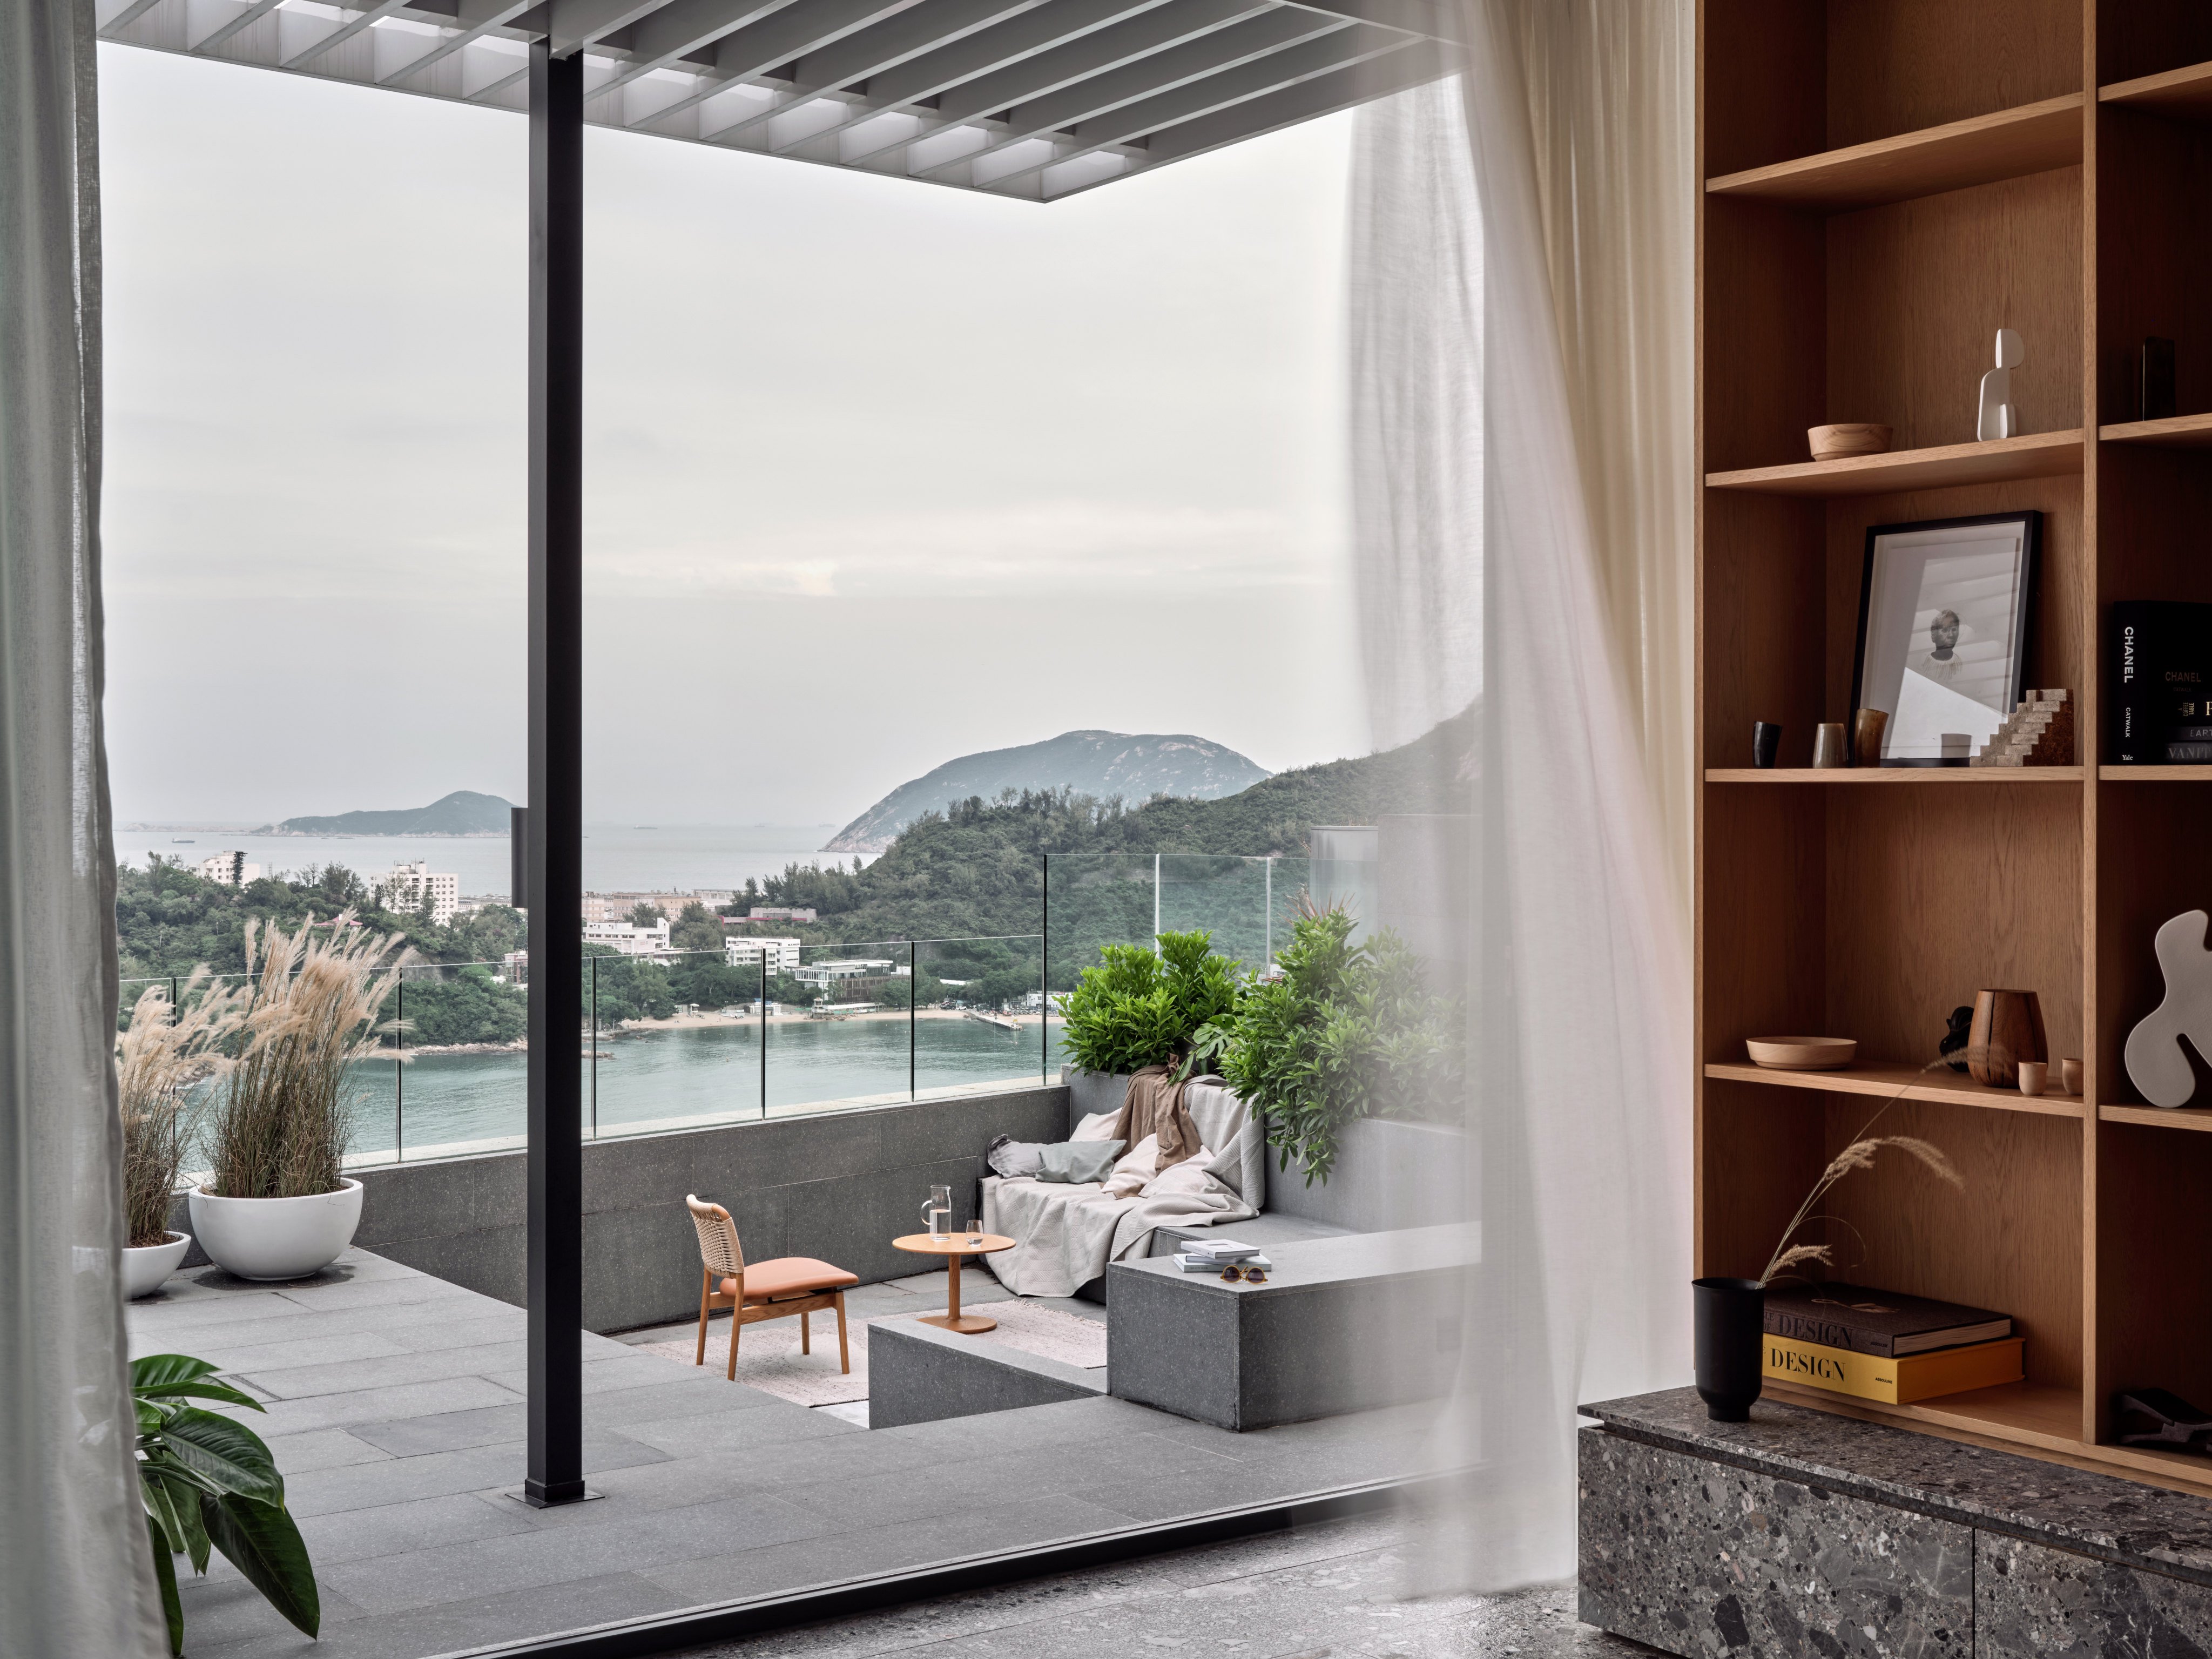 Once dark and heavy, this Hong Kong house is now a coastal-inspired bright and breezy home for a family of four. Photo: Jonathan Leijonhufvud